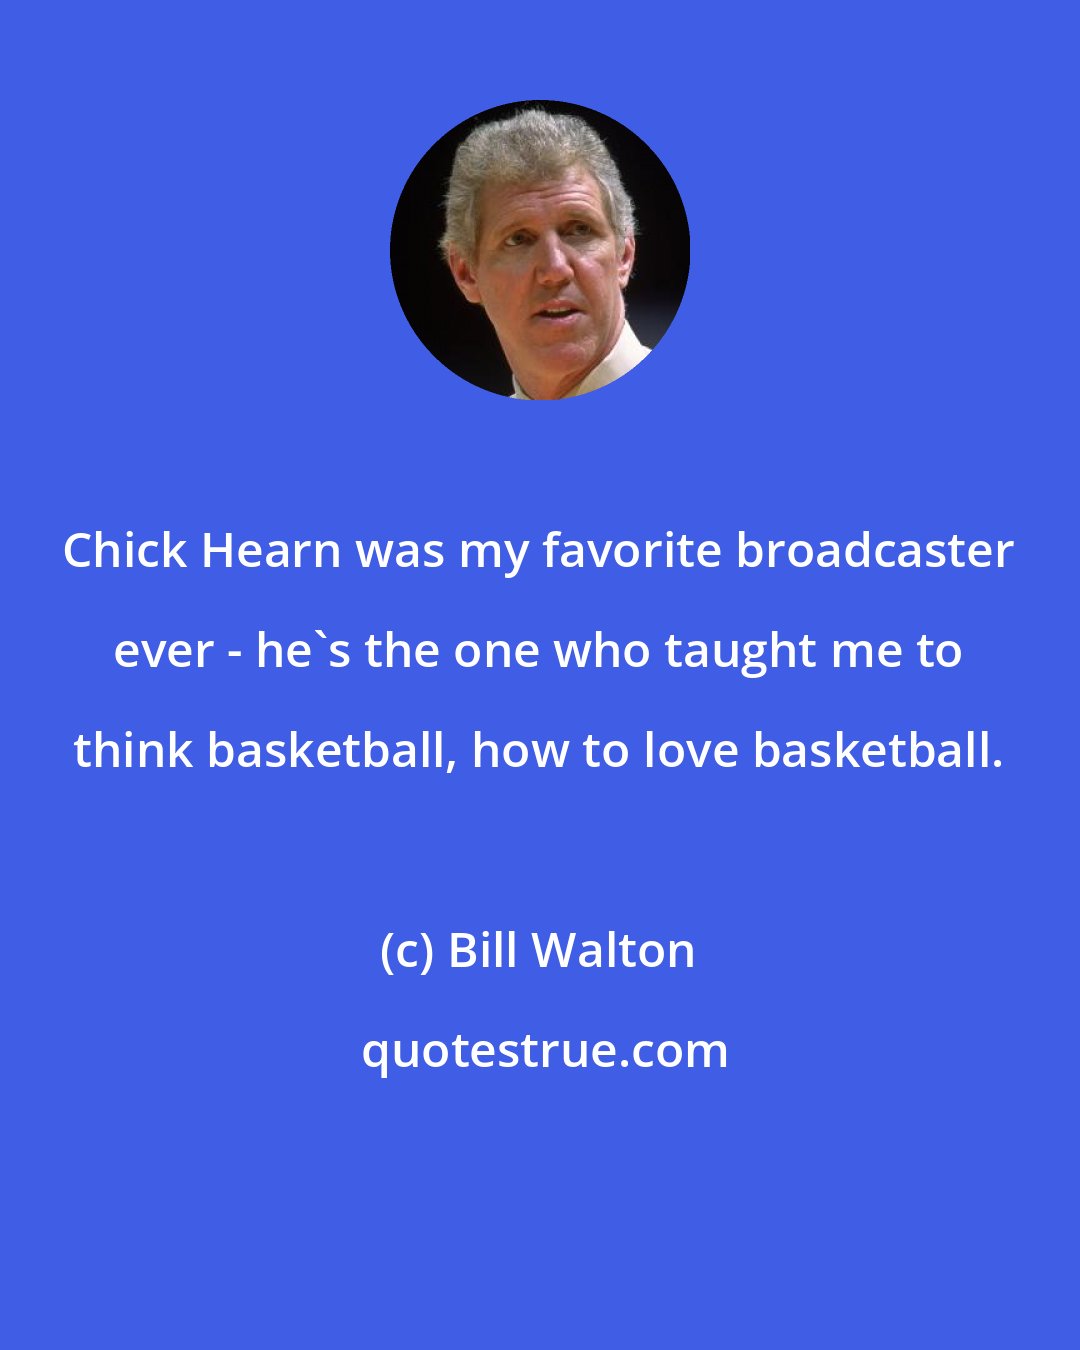 Bill Walton: Chick Hearn was my favorite broadcaster ever - he's the one who taught me to think basketball, how to love basketball.